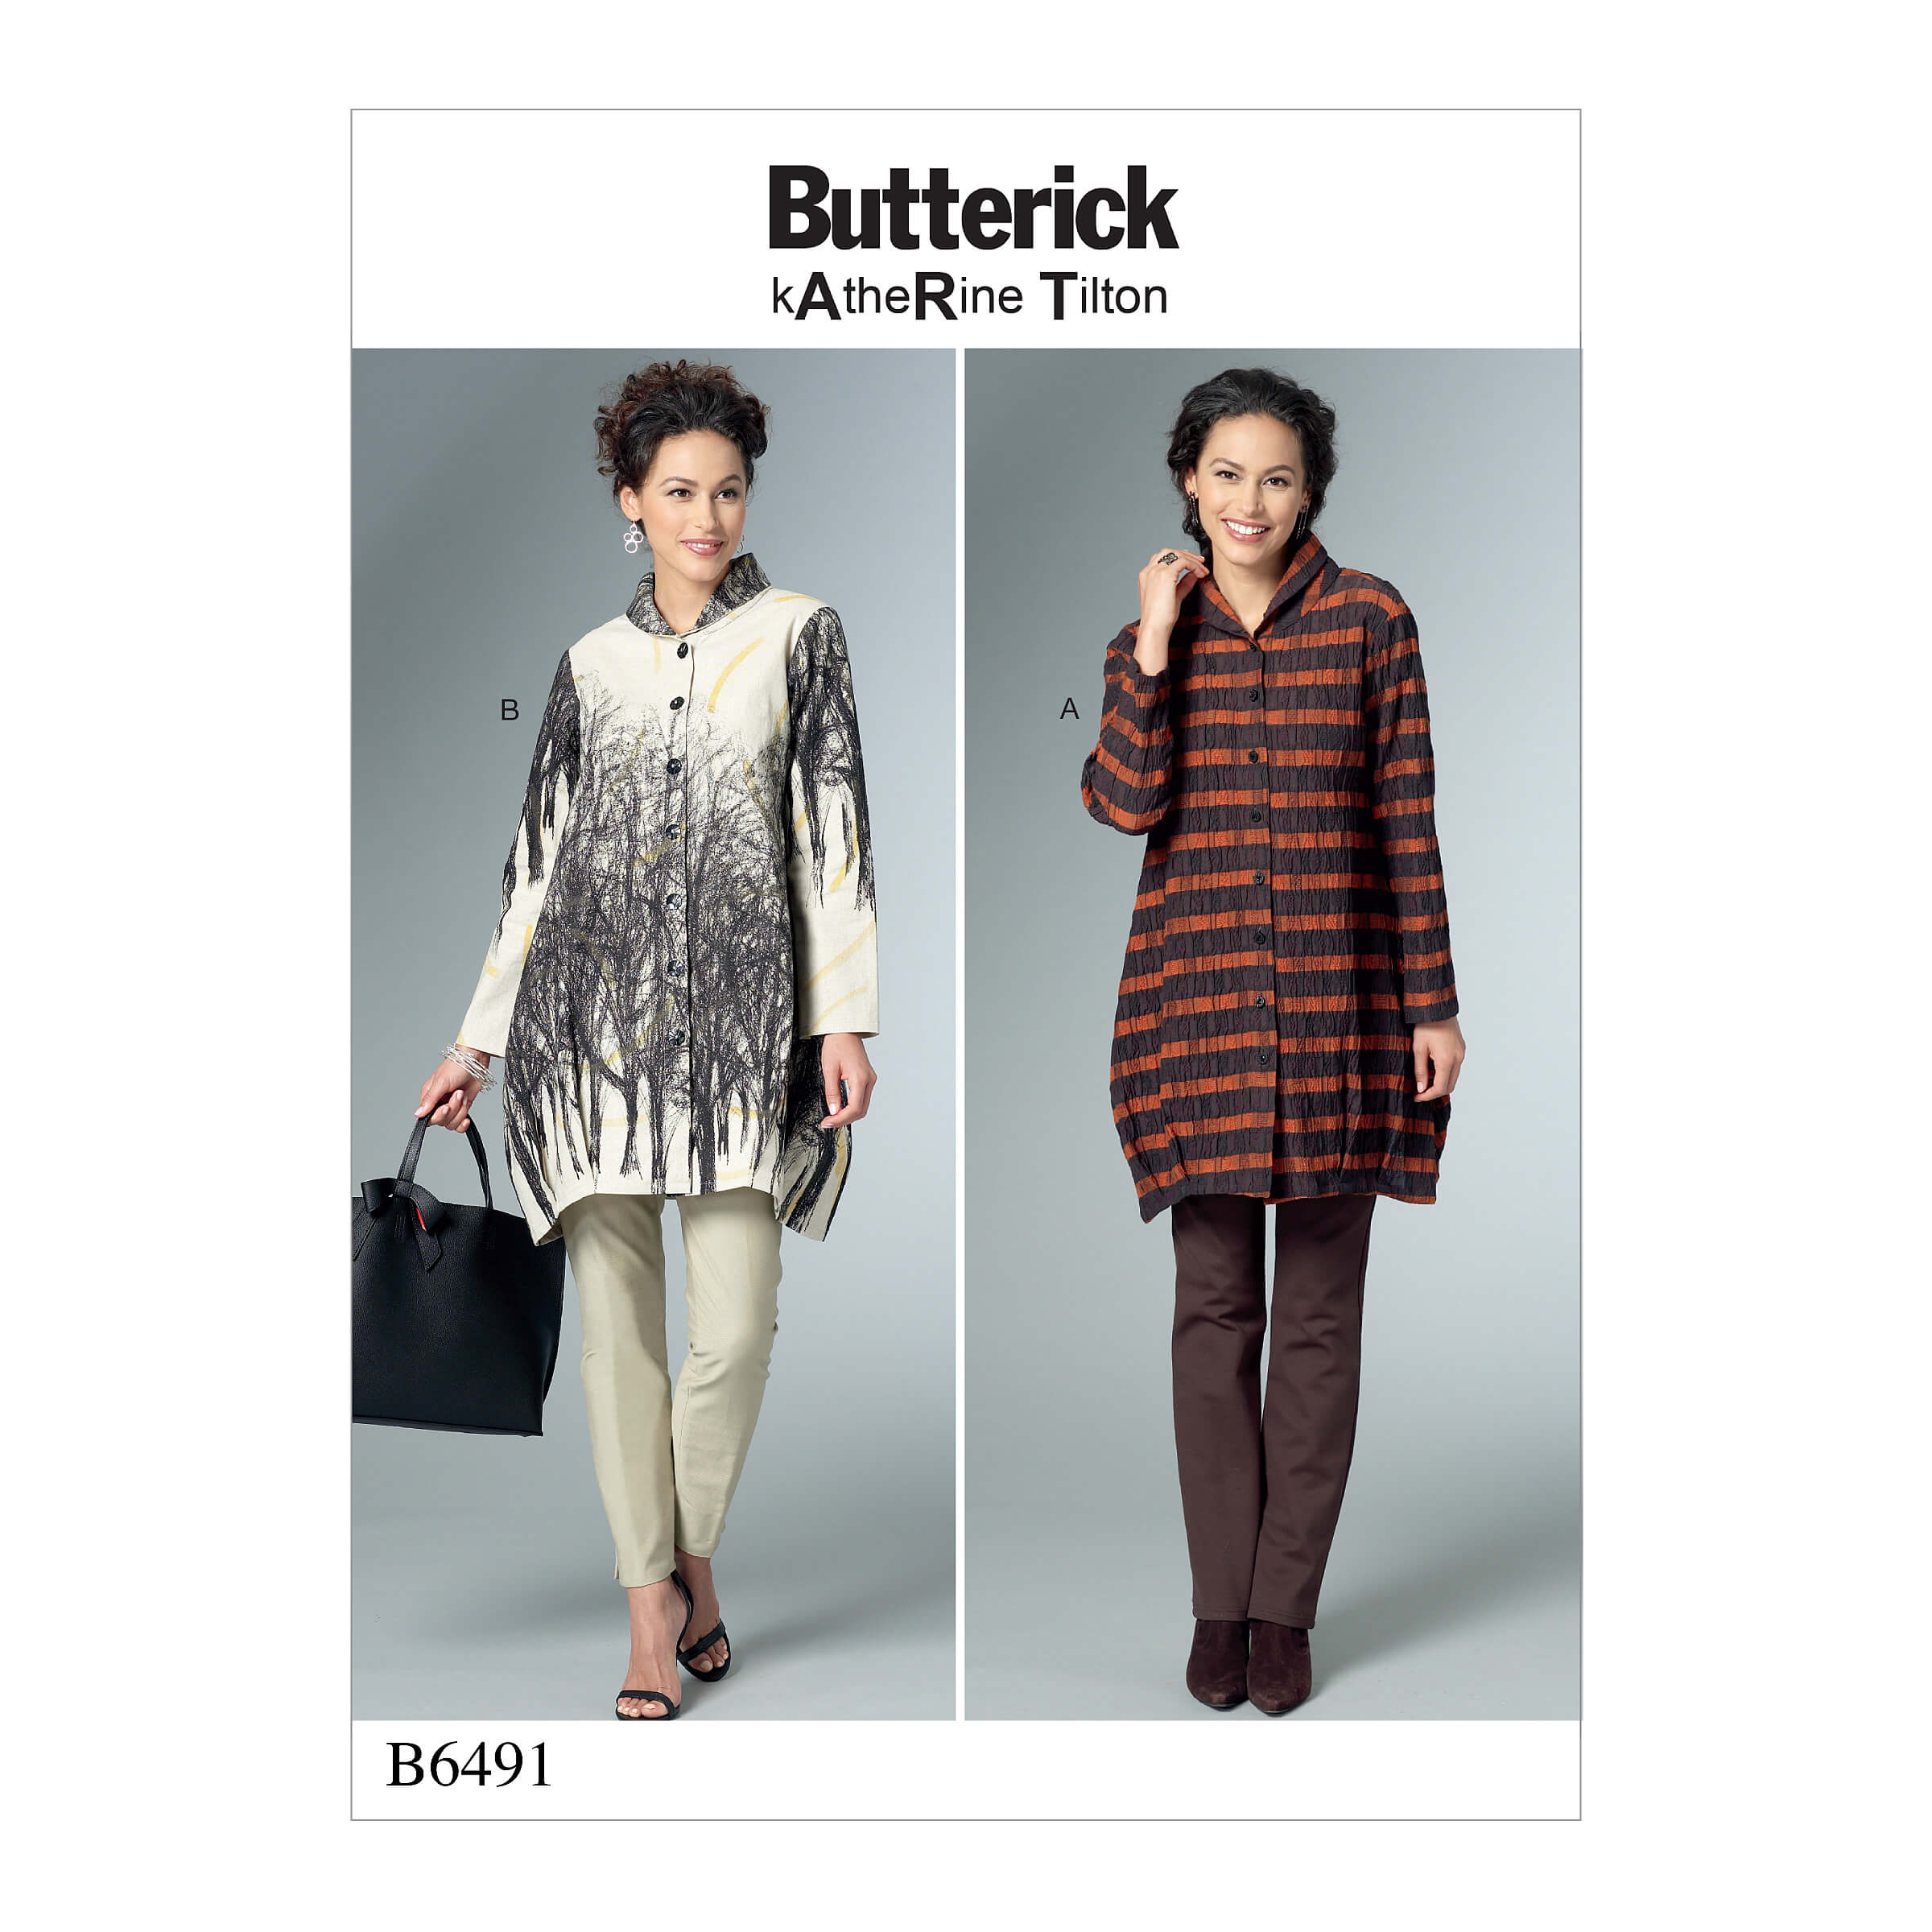 Butterick Sewing Pattern B6491 Misses' Loose Shirts with Stand Collar, Shaped Hem and Tucks